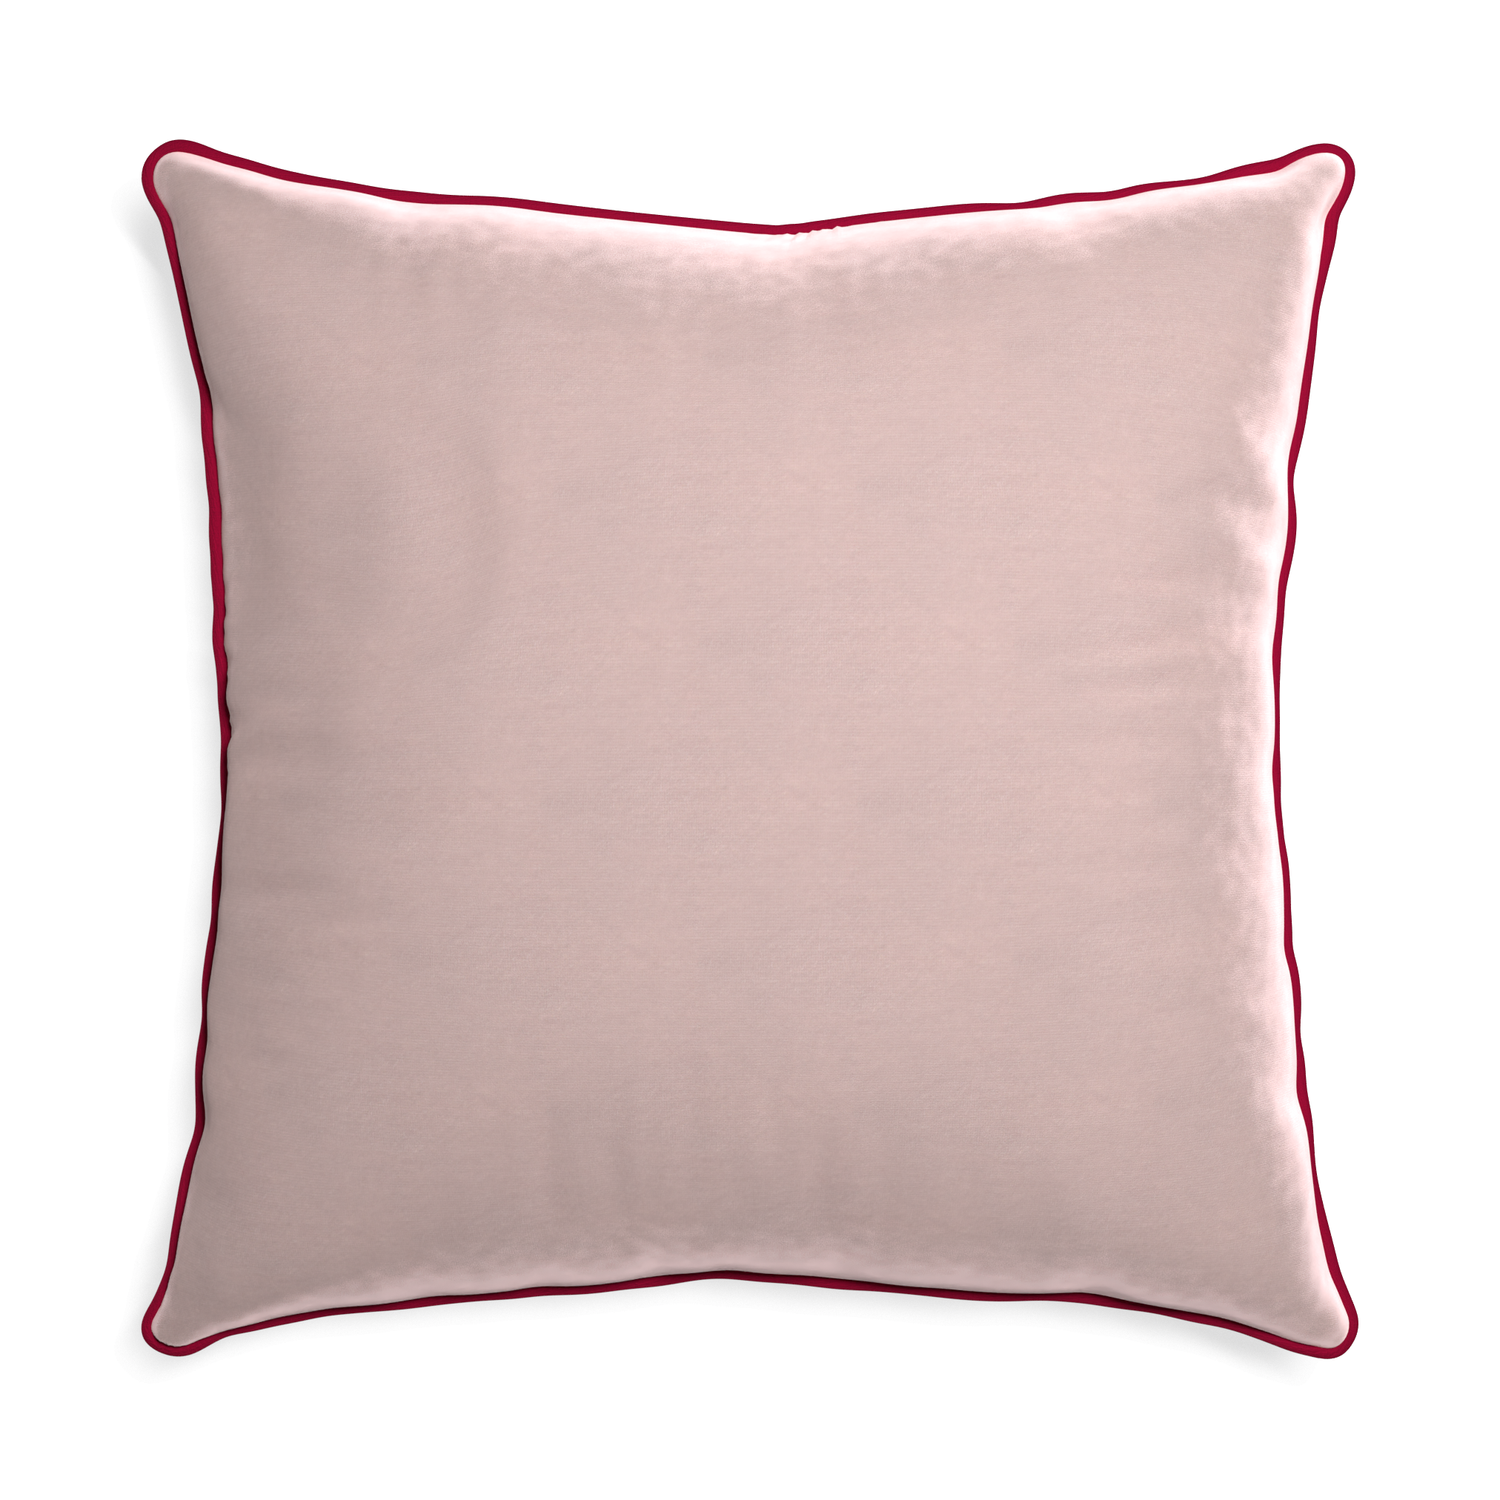 square light pink velvet pillow with dark red piping